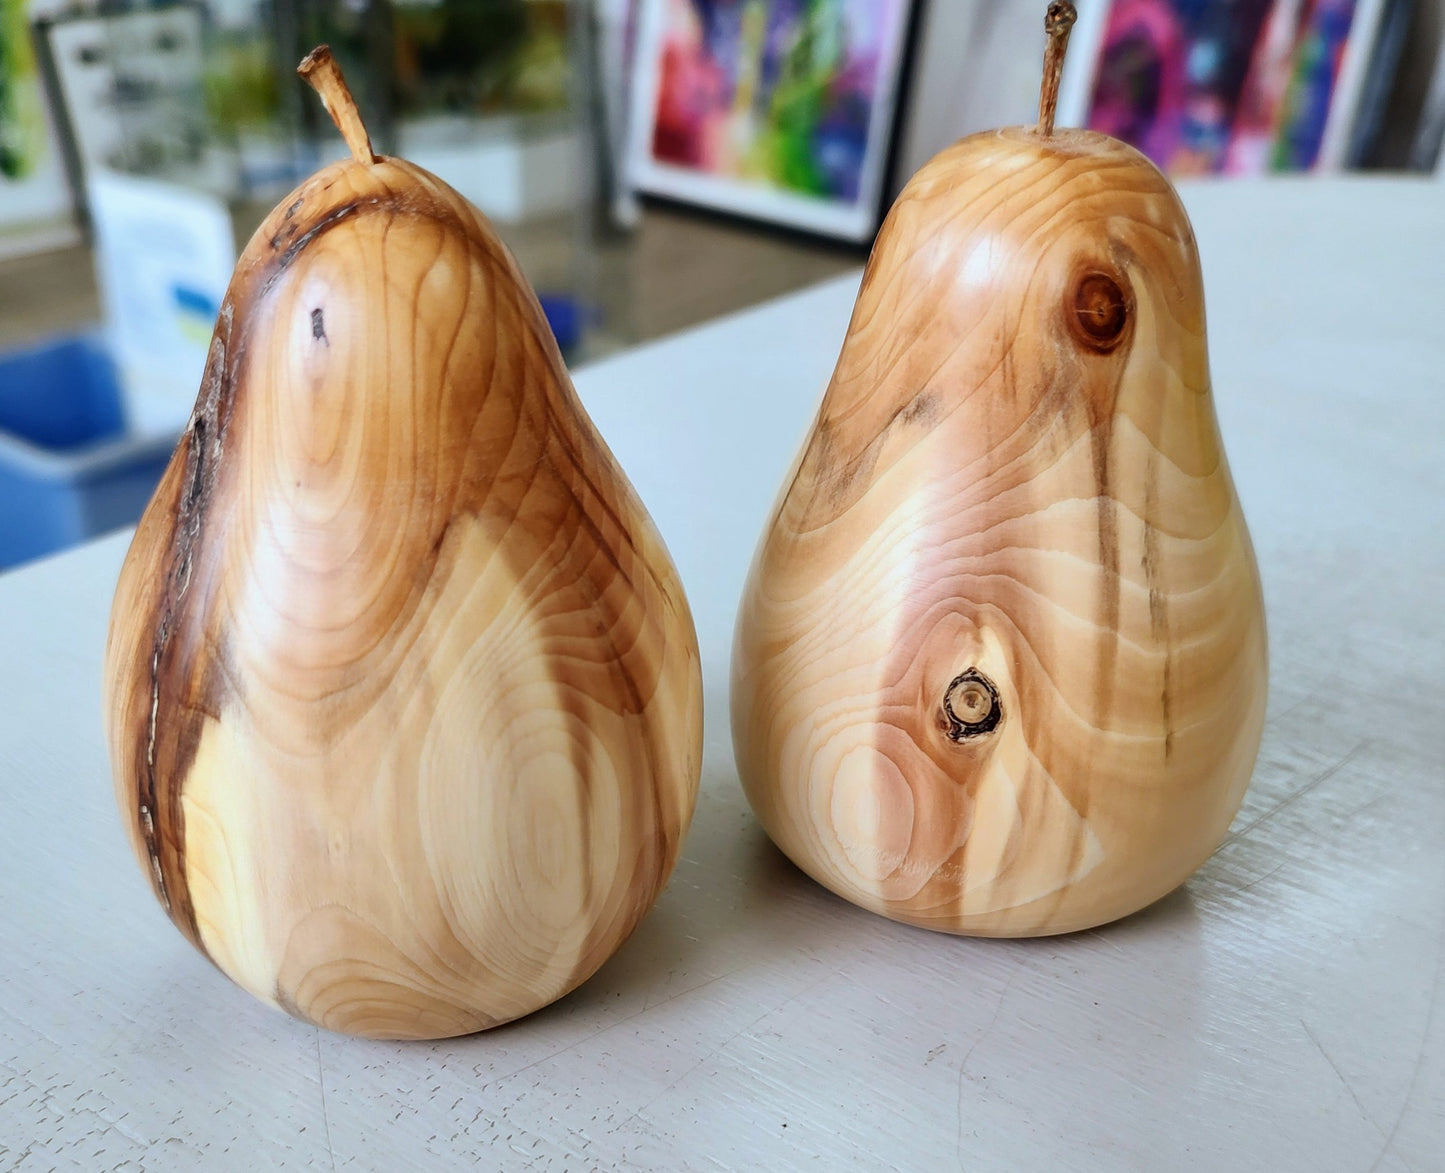 Andy Harris- Turned Wooden Fruit